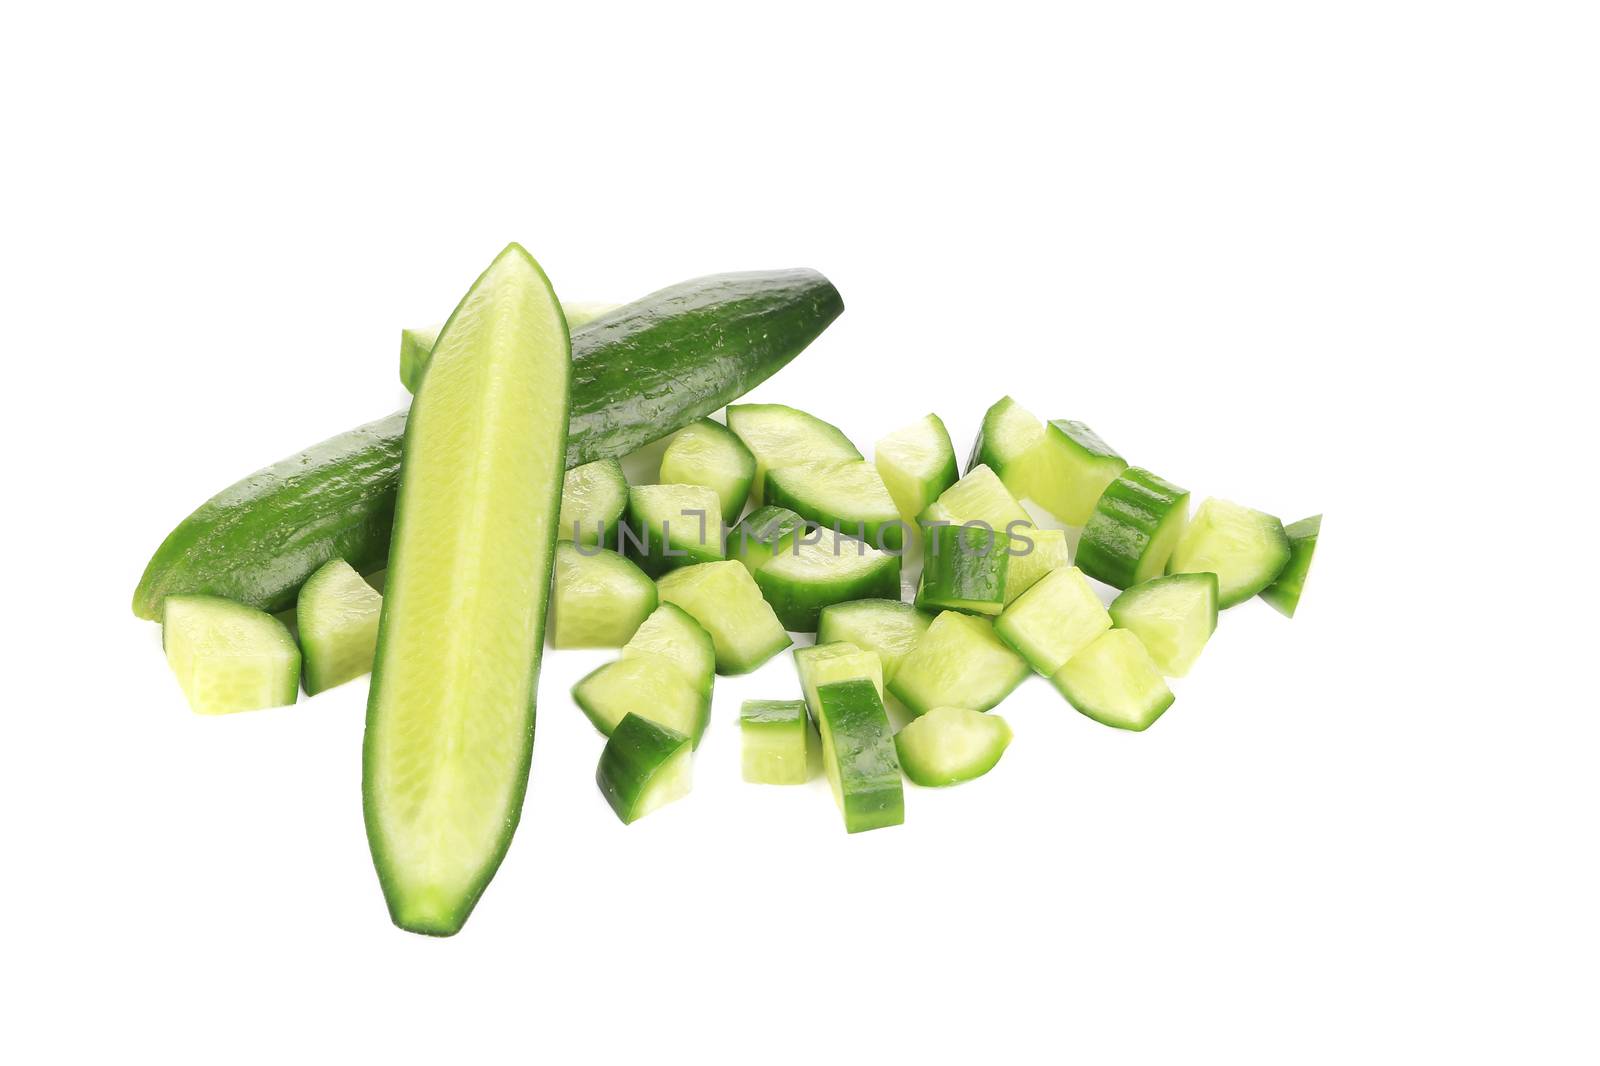 Sliced tasty cucumber. Isolated on a white background.